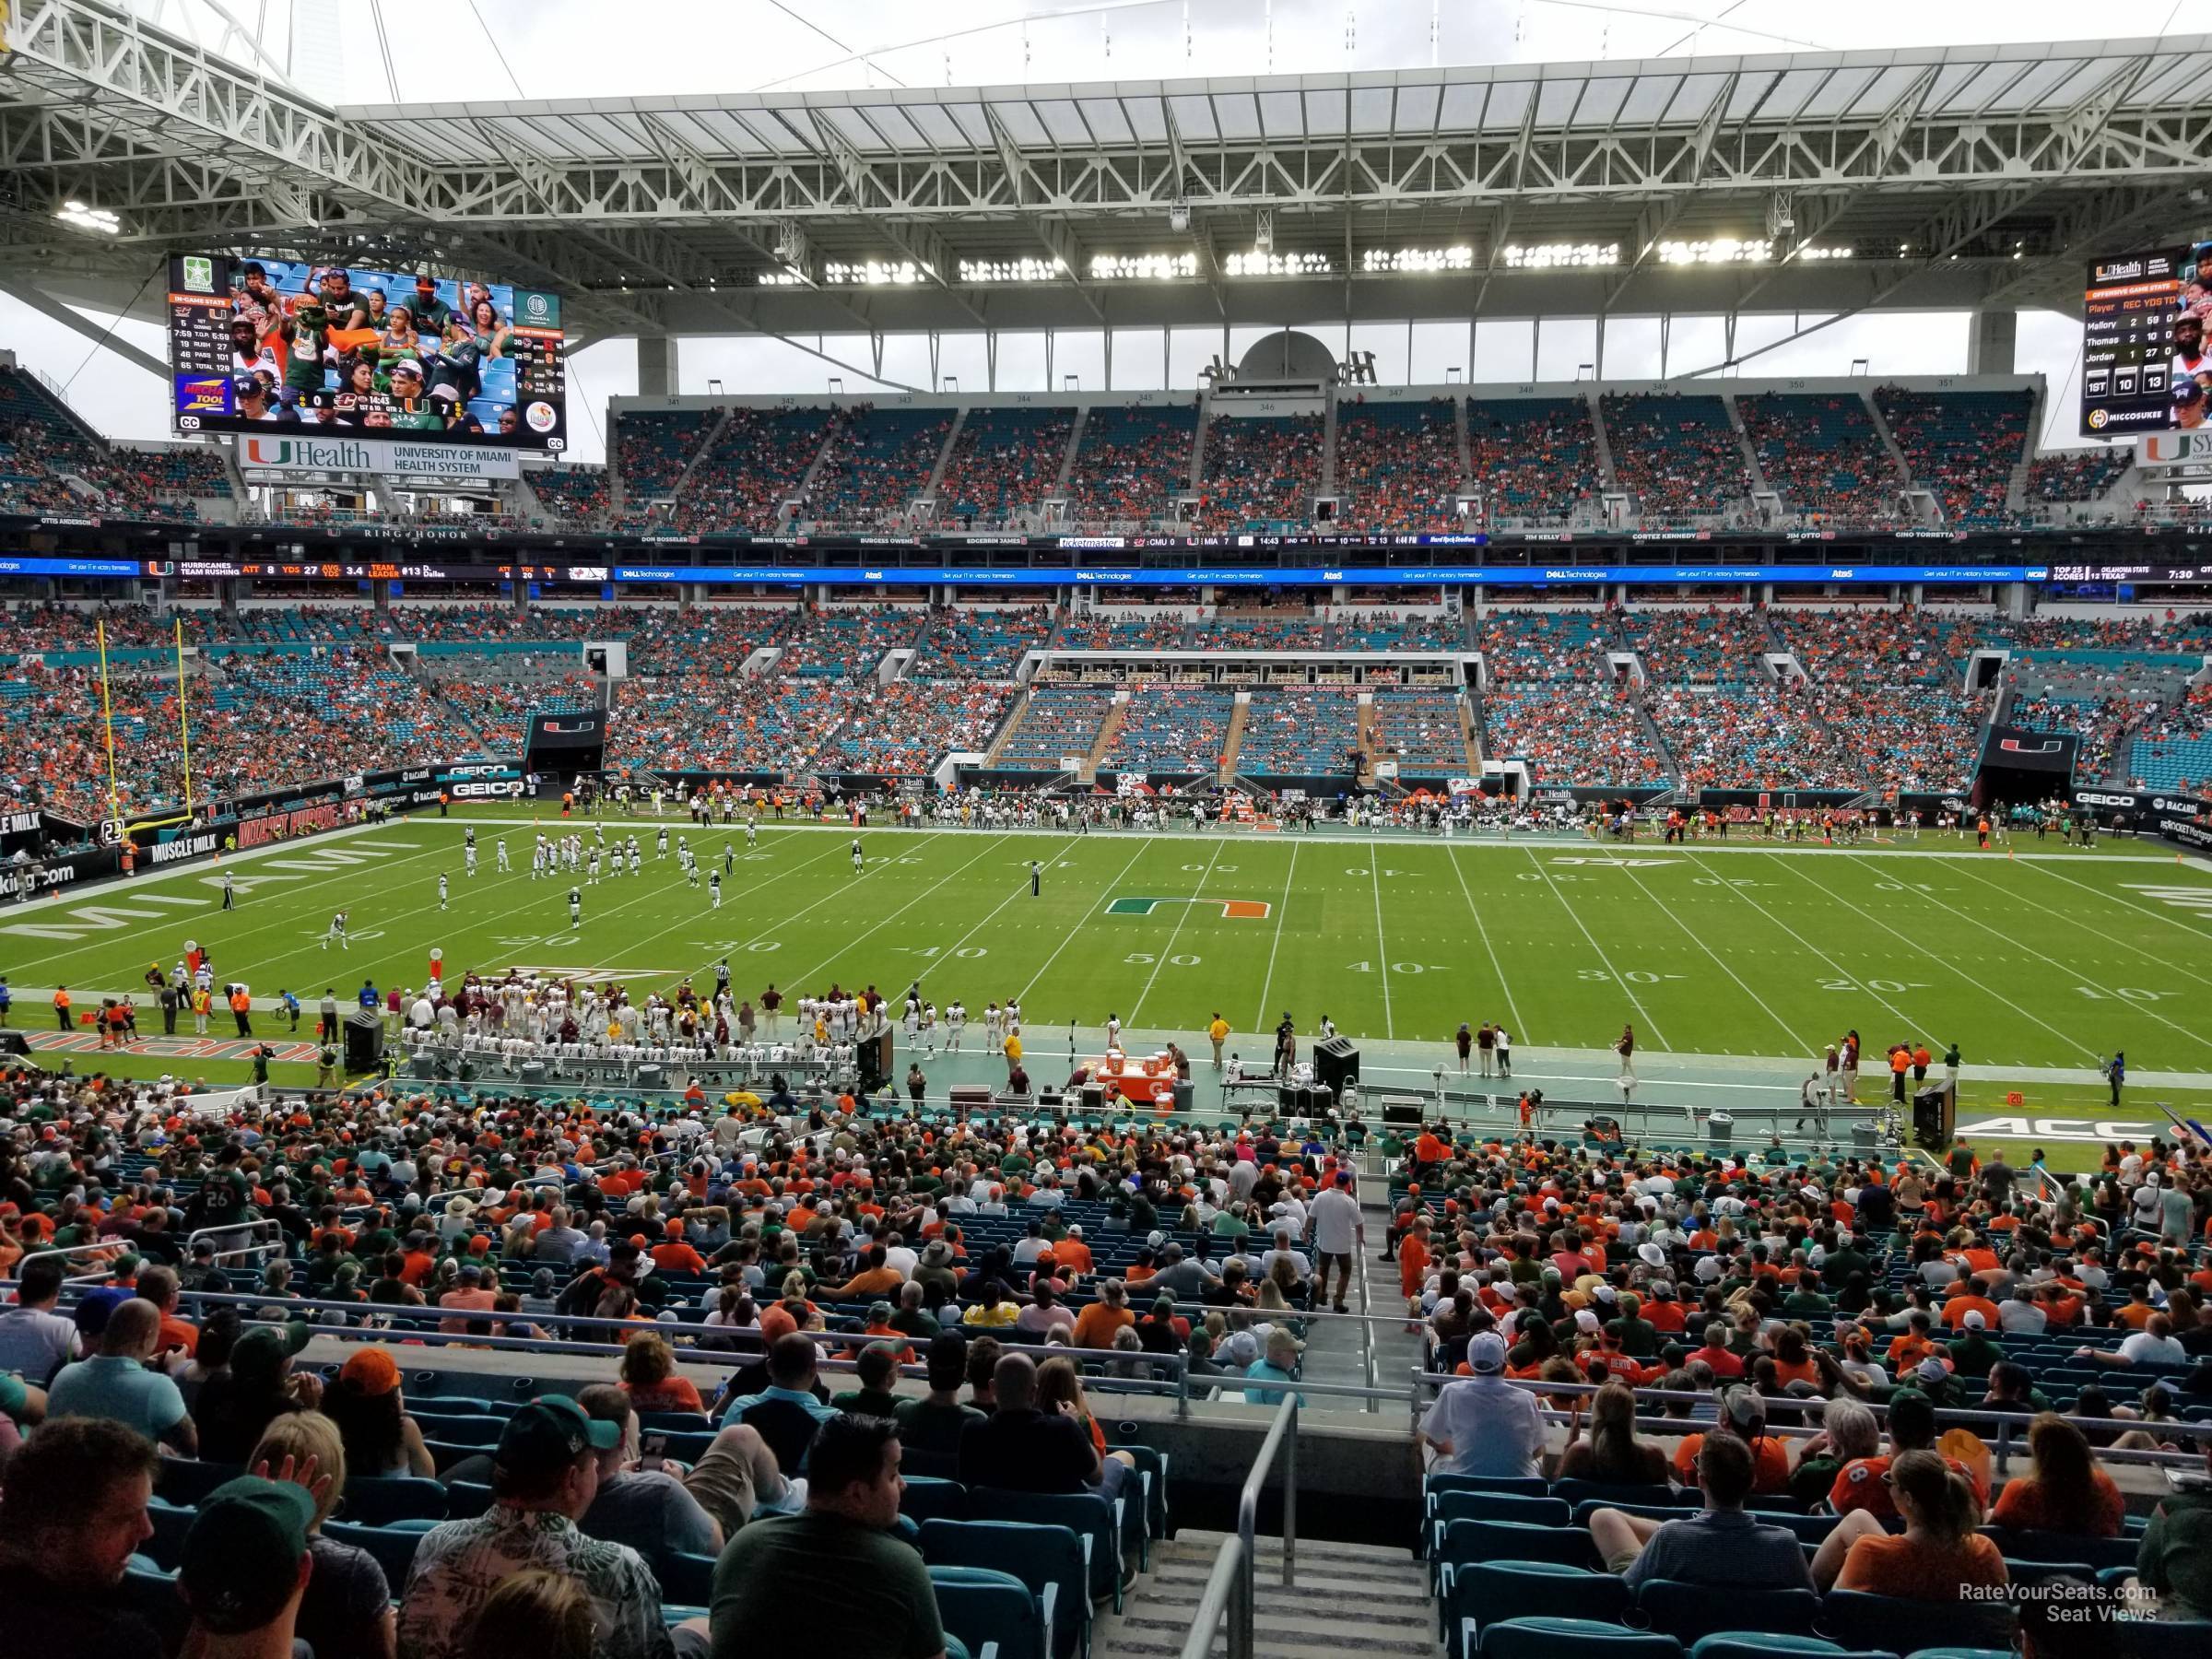 section 217, row 10 seat view  for football - hard rock stadium